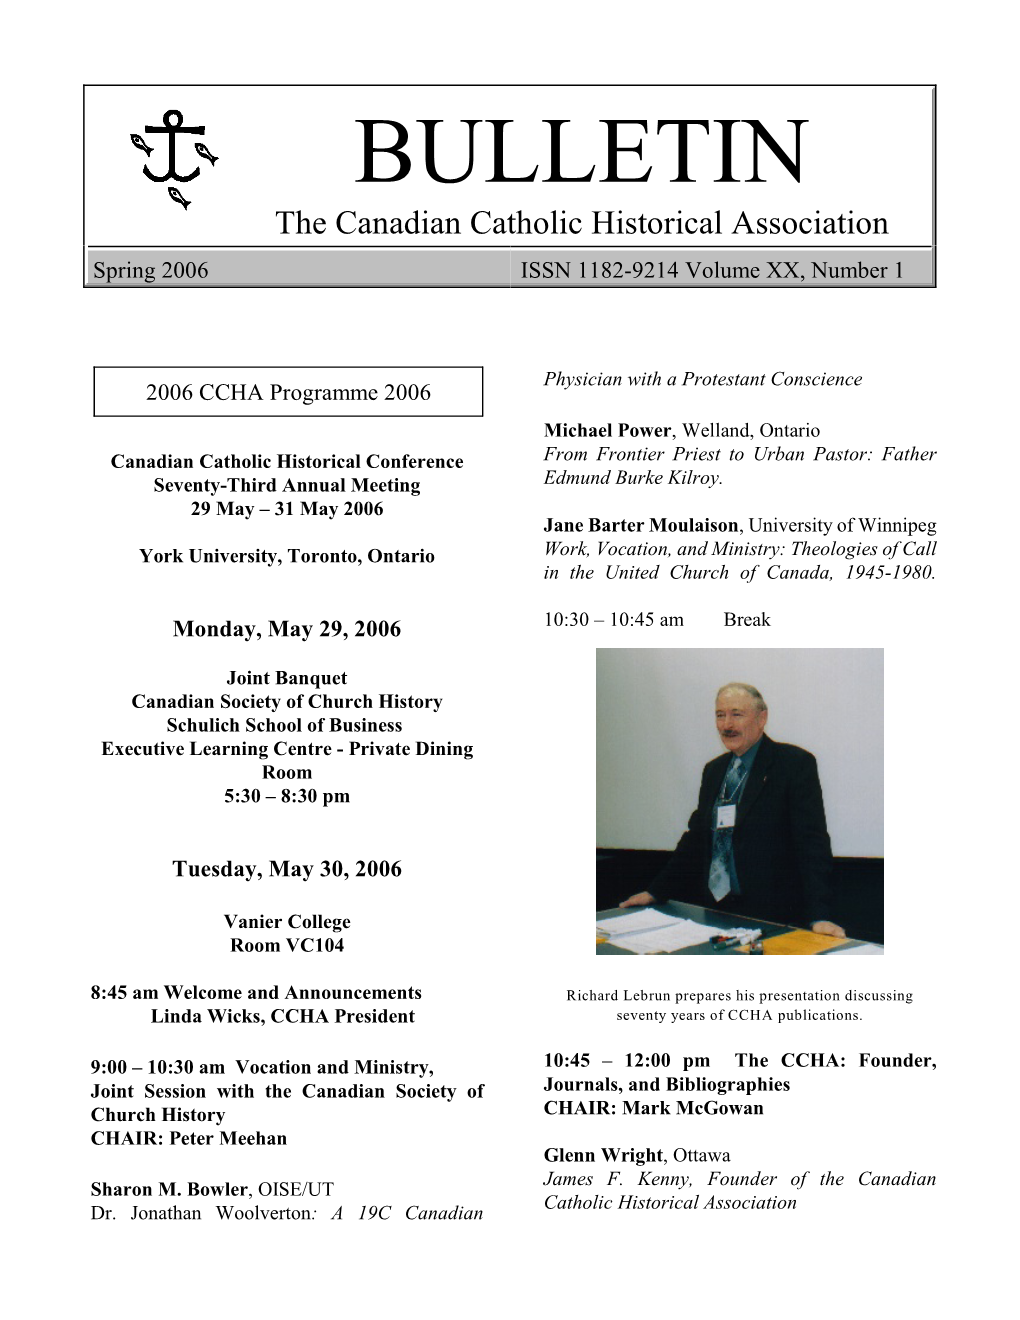 BULLETIN the Canadian Catholic Historical Association Spring 2006 ISSN 1182-9214 Volume XX, Number 1